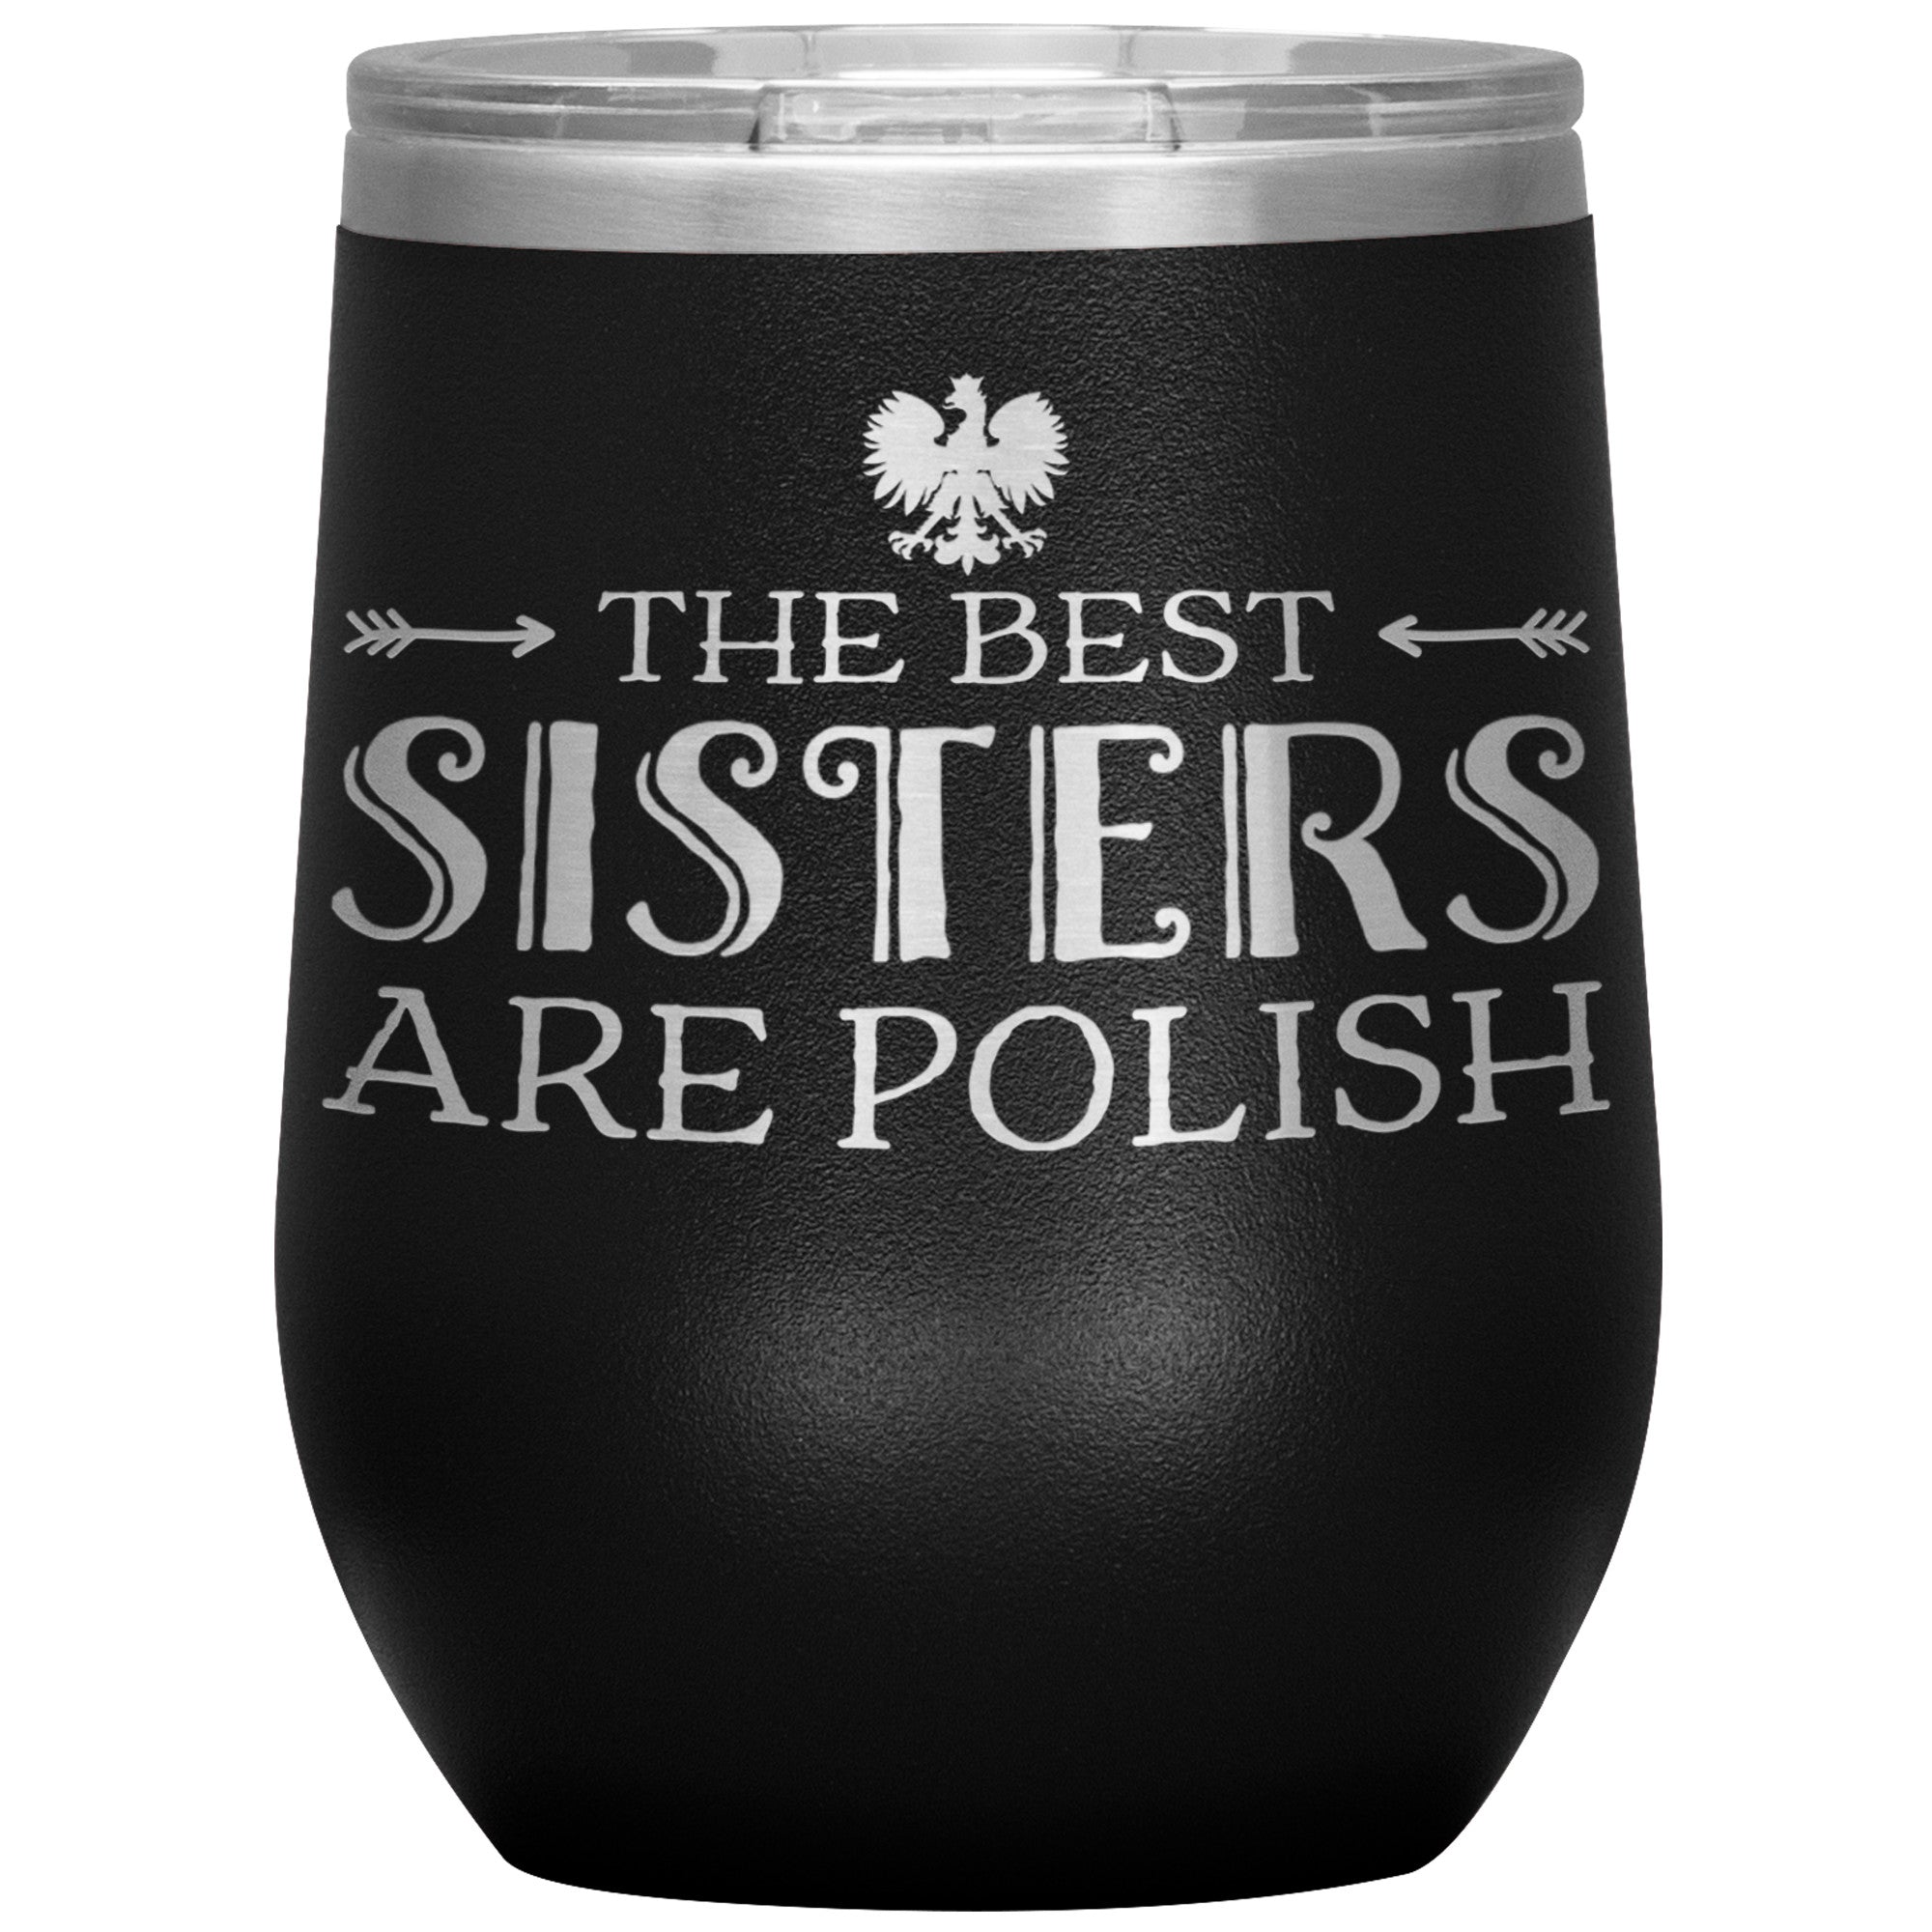 The Best Sisters Are Polish Insulated Wine Tumbler Tumblers teelaunch Black  